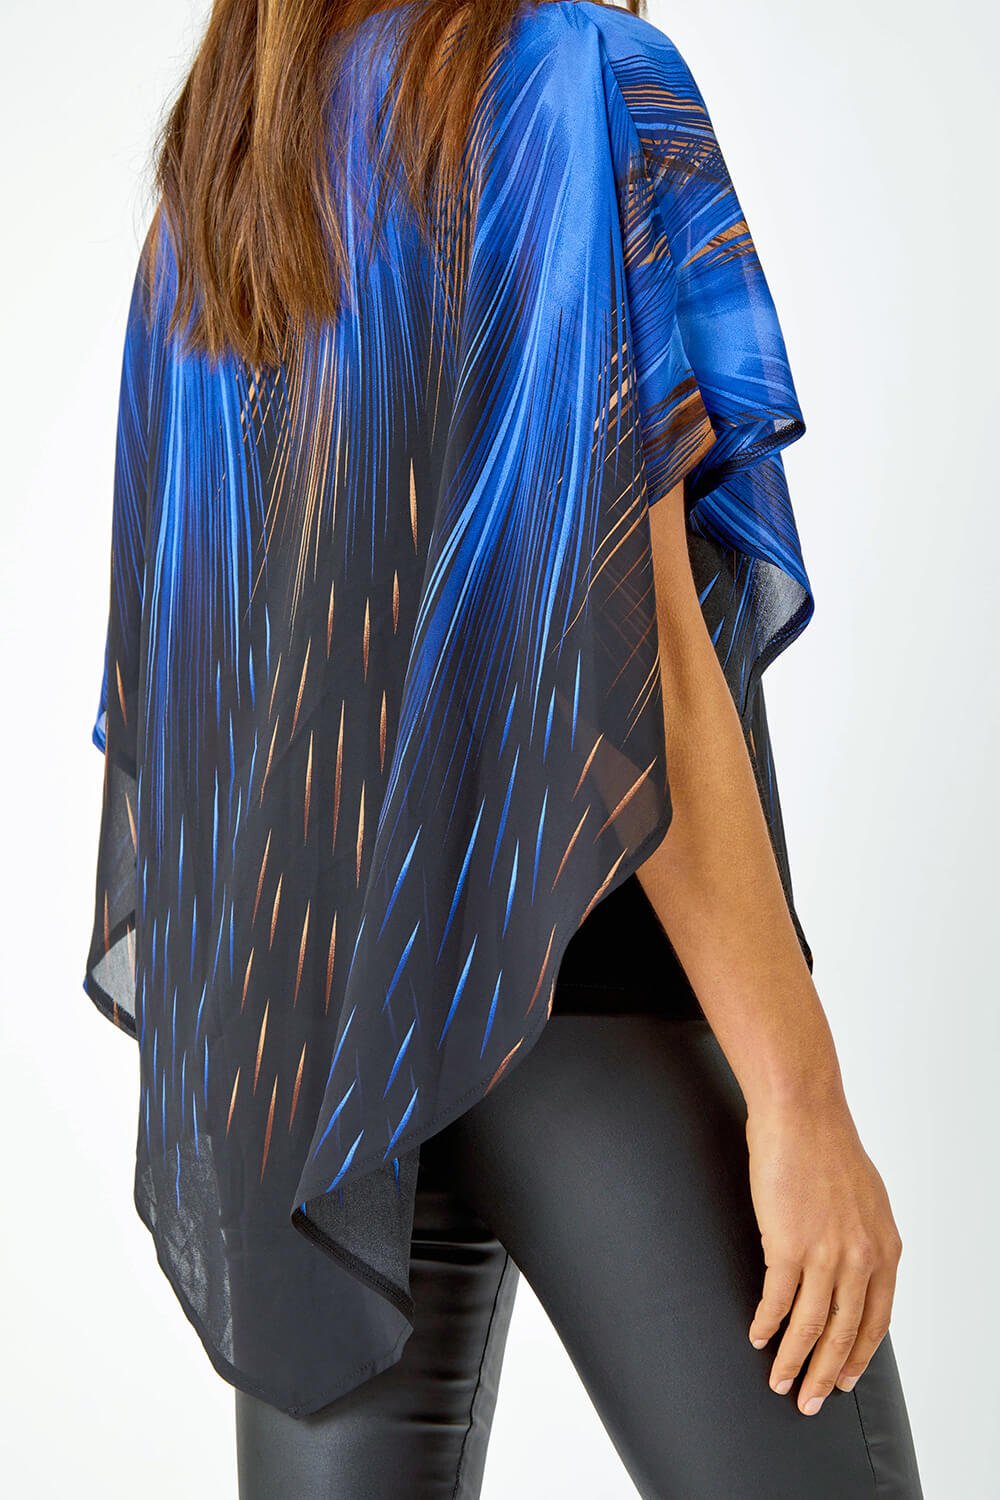 Blue Abstract Chiffon Overlay Stretch Top, Image 5 of 5